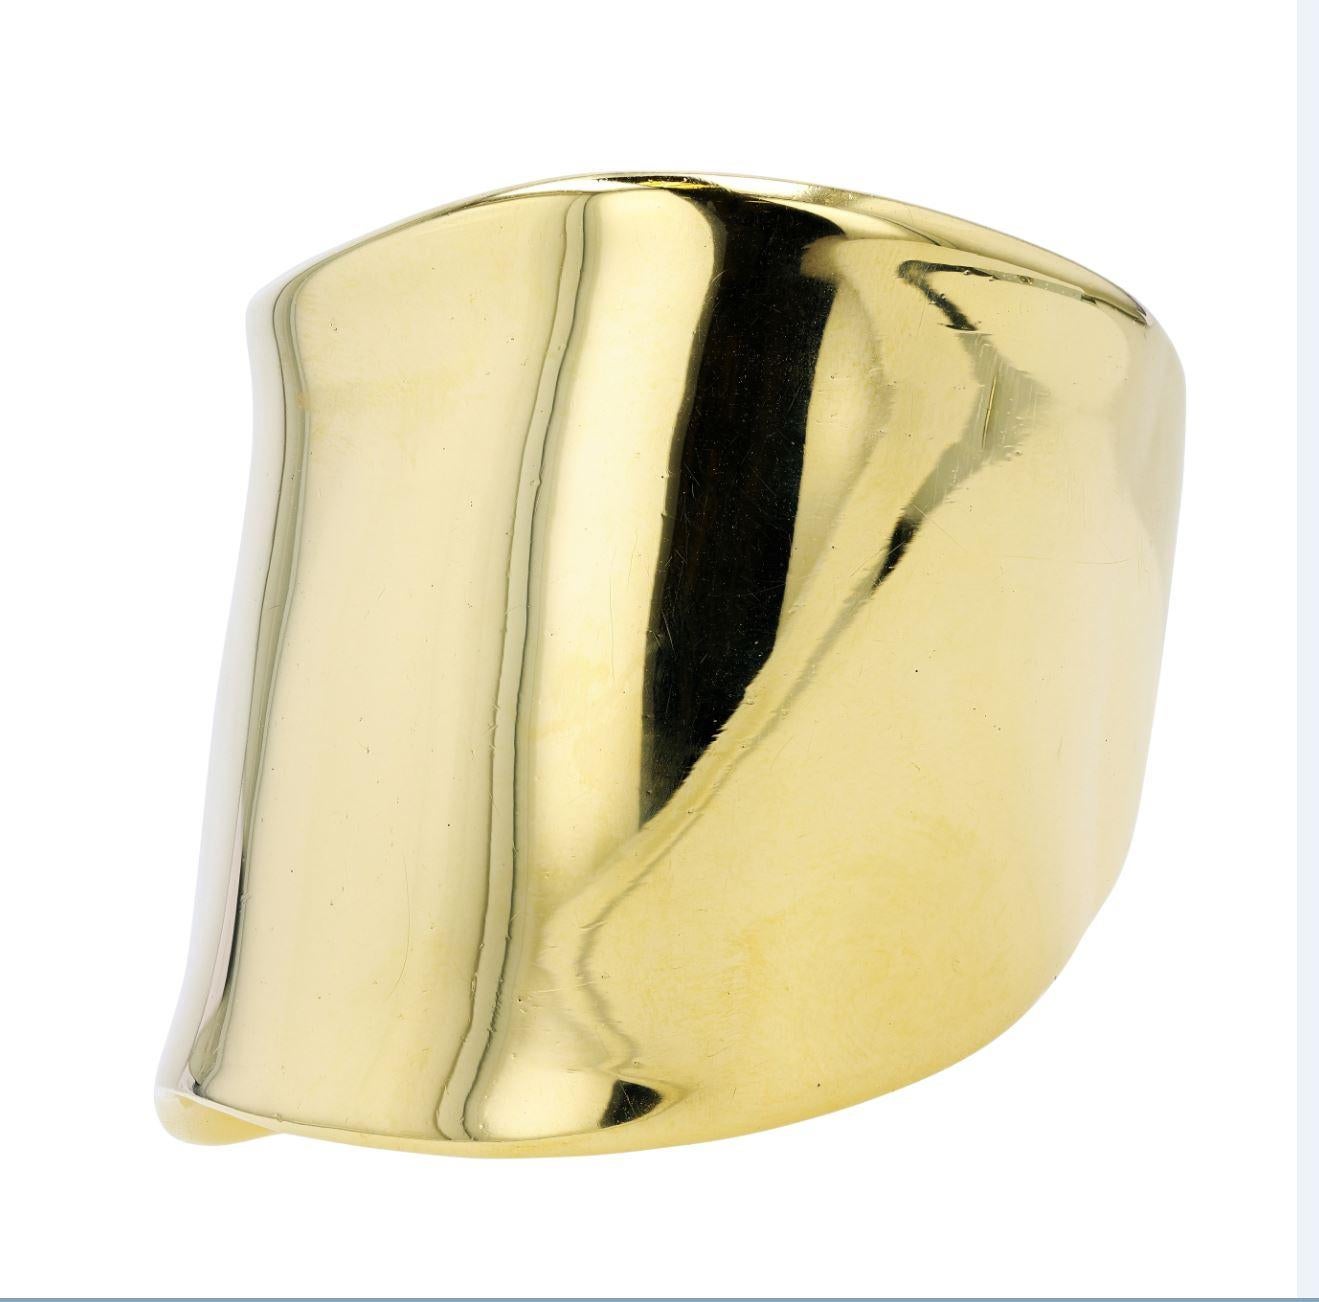 A 1980s Elsa Peretti for Tiffany & Co. Bone Cuff in 18 karat yellow gold.

Designed in the early 1970s at the beginning of Elsa Peretti's career at Tiffany & Co., the Bone Cuff entered the world of high style at an inflection point in the worlds of